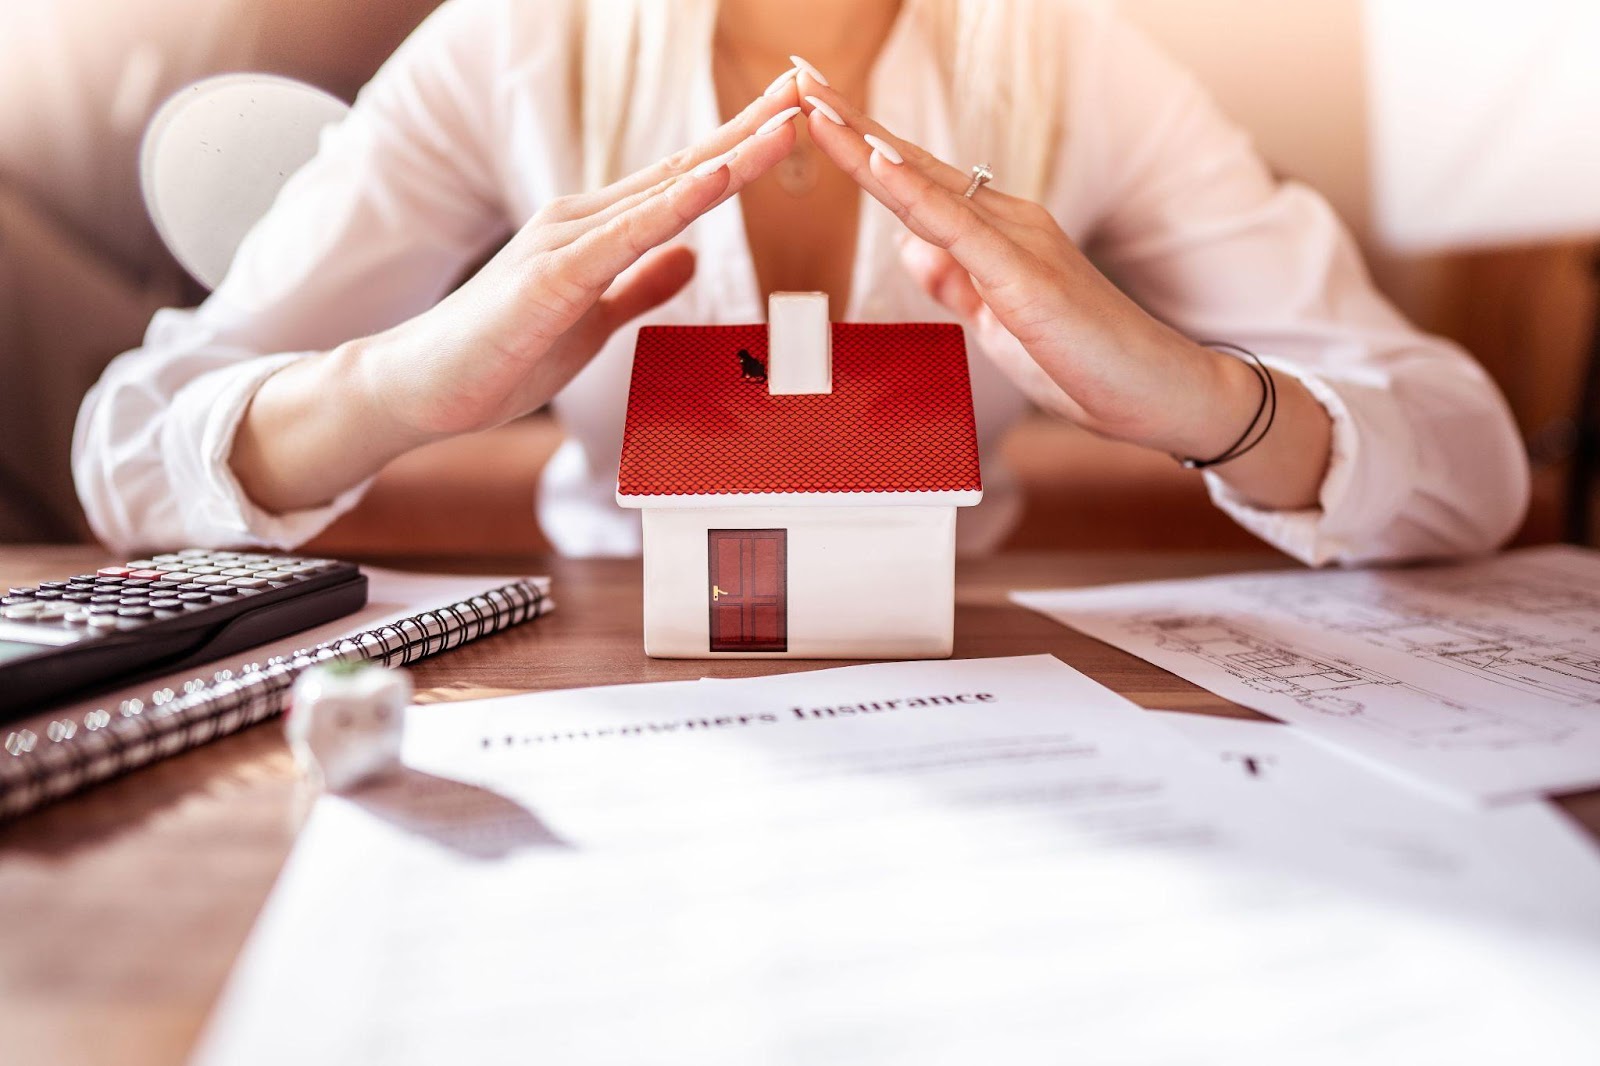 5 Tips on How to Prepare Your Finances for Buying a House